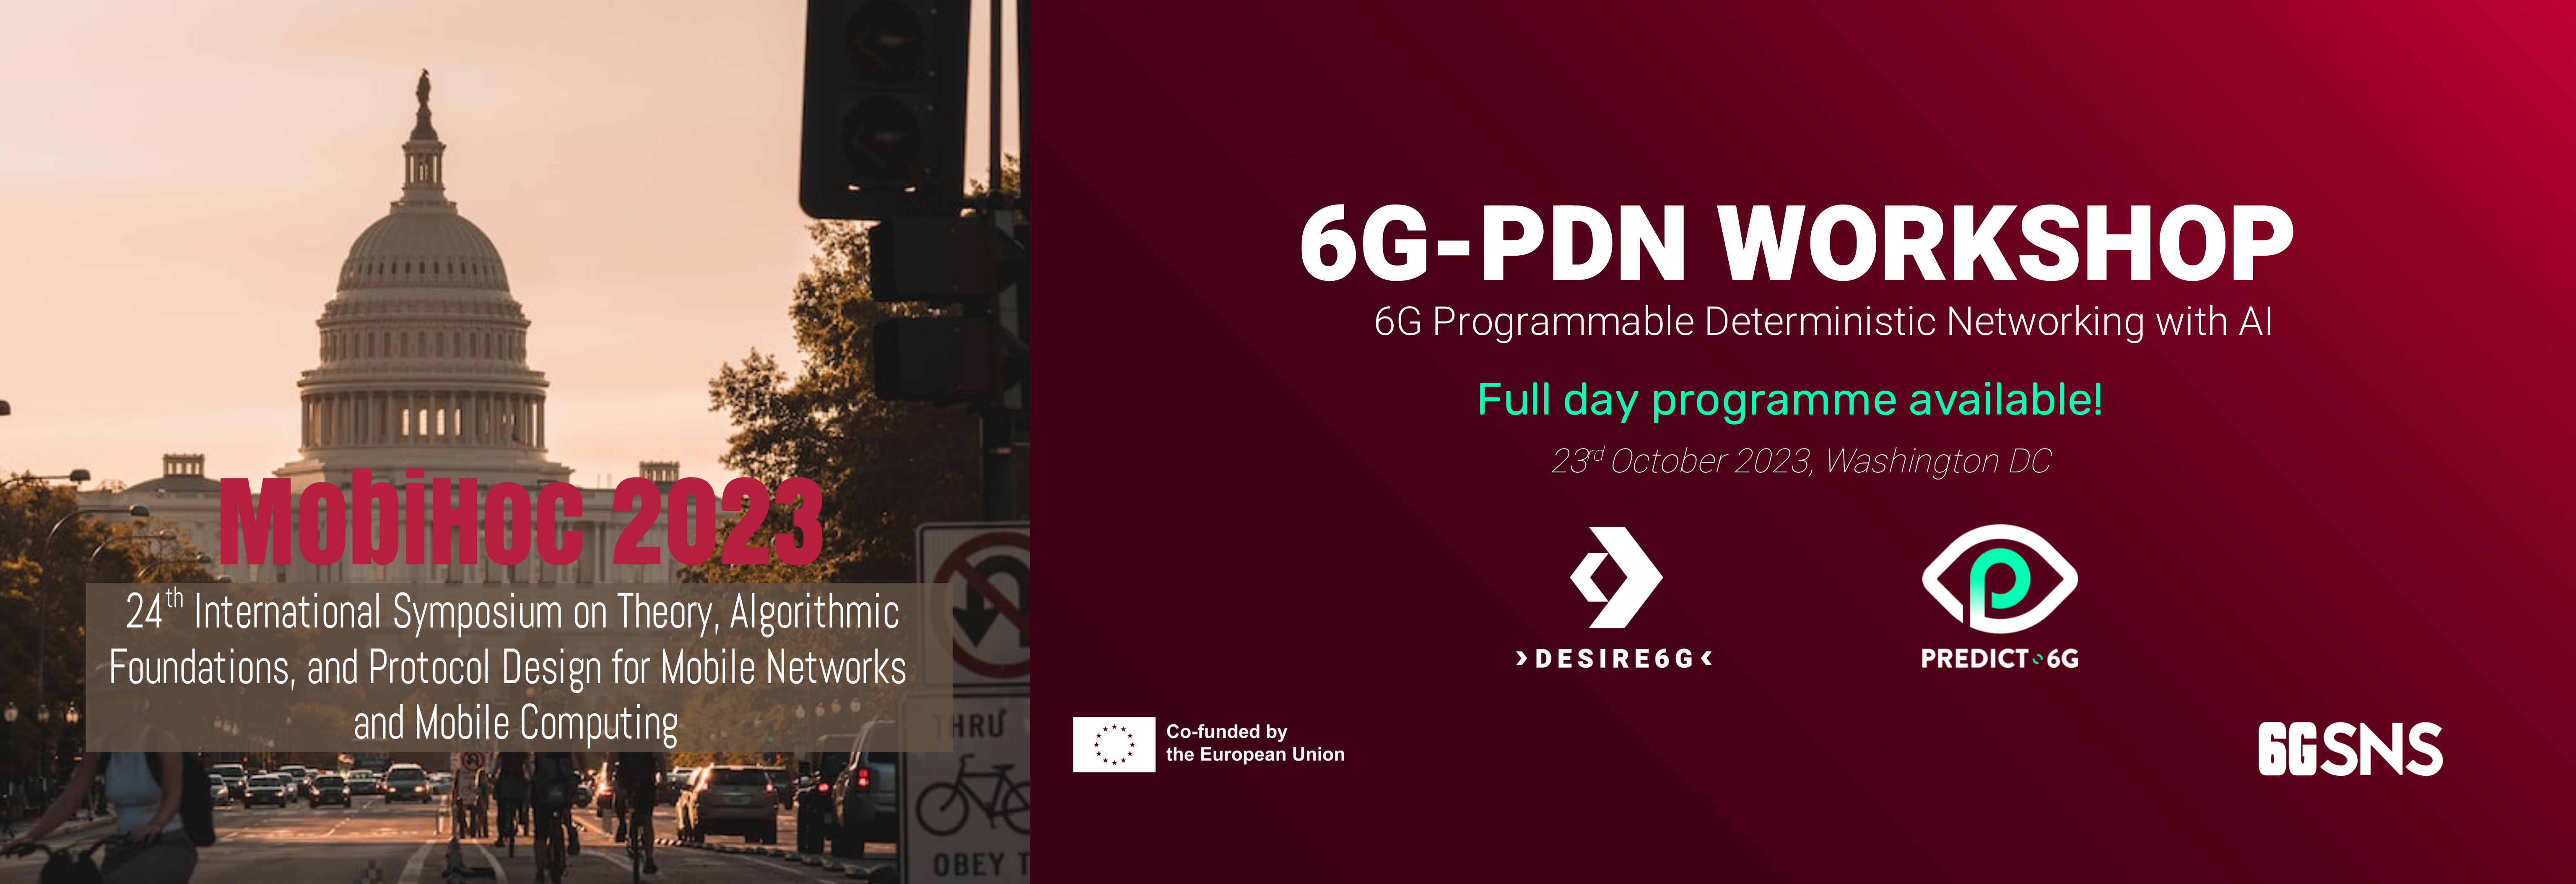 Programme available for 6G-PDN workshop